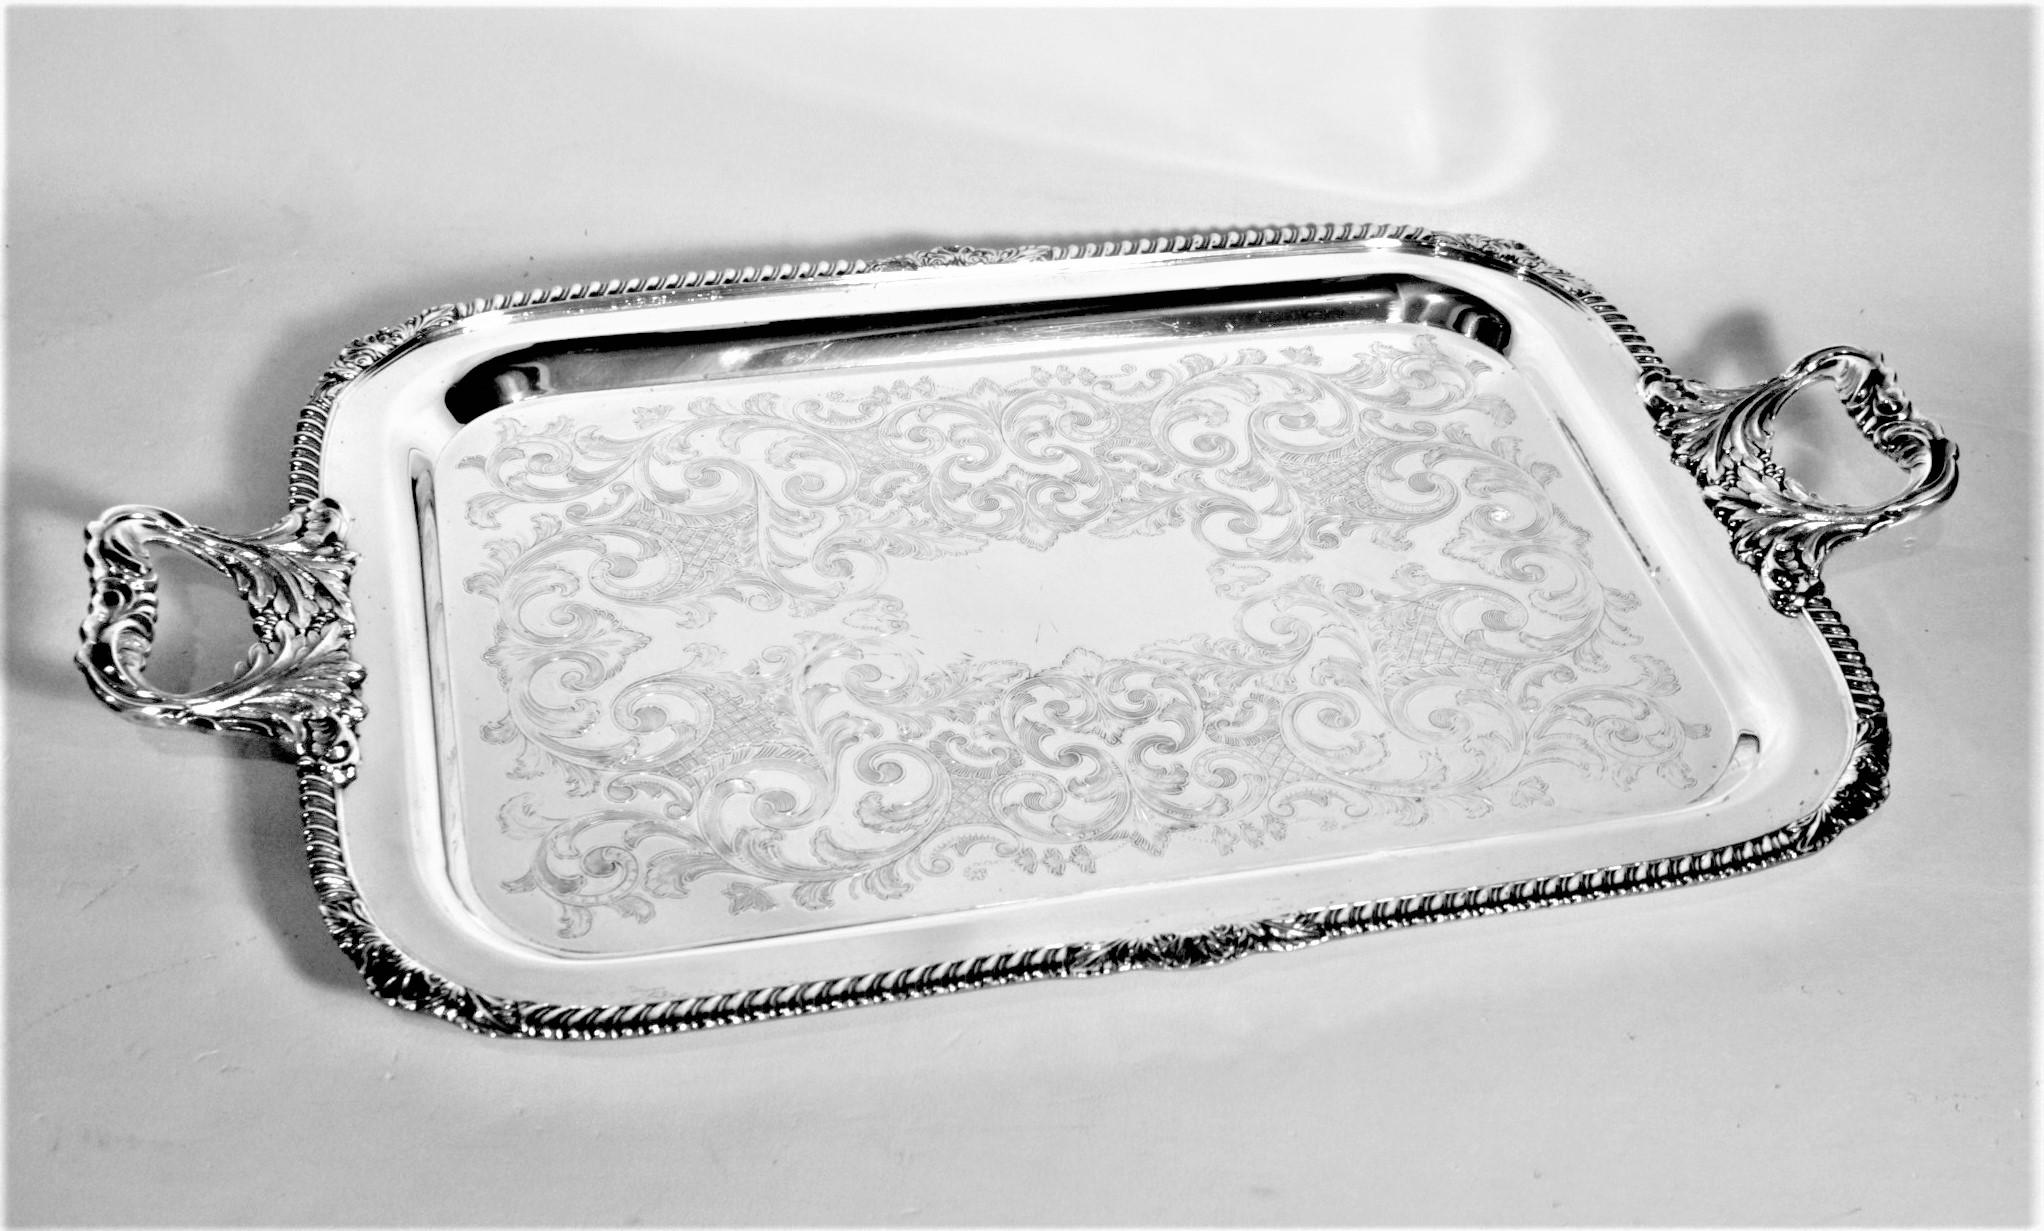 This antique styled silver plated serving tray was made by Dobman of England in approximately 1950 in a Victorian style. The tray is rectangular in shape with a rope styled beaded border and figural stylized leaves handles. The surface of the tray